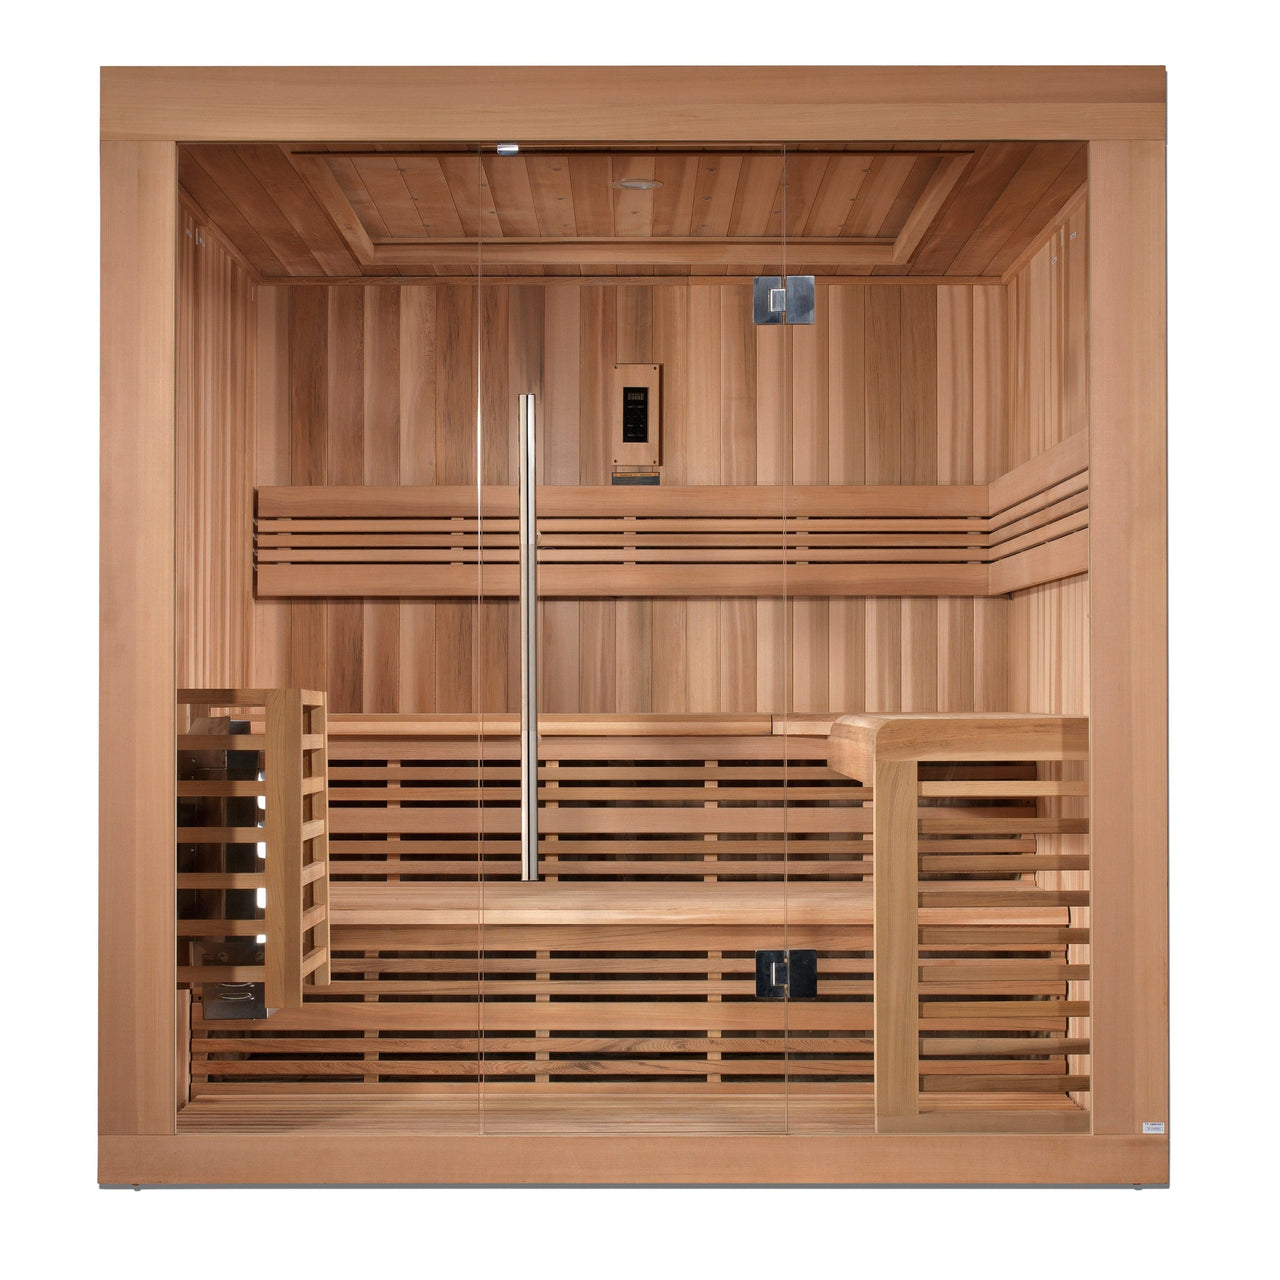 GOLDEN DESIGNS "Osla Edition" 6 Person Traditional Steam Sauna - Canadian Red Cedar - LUXUSFIT Luxury Exercise & Recovery Equipment